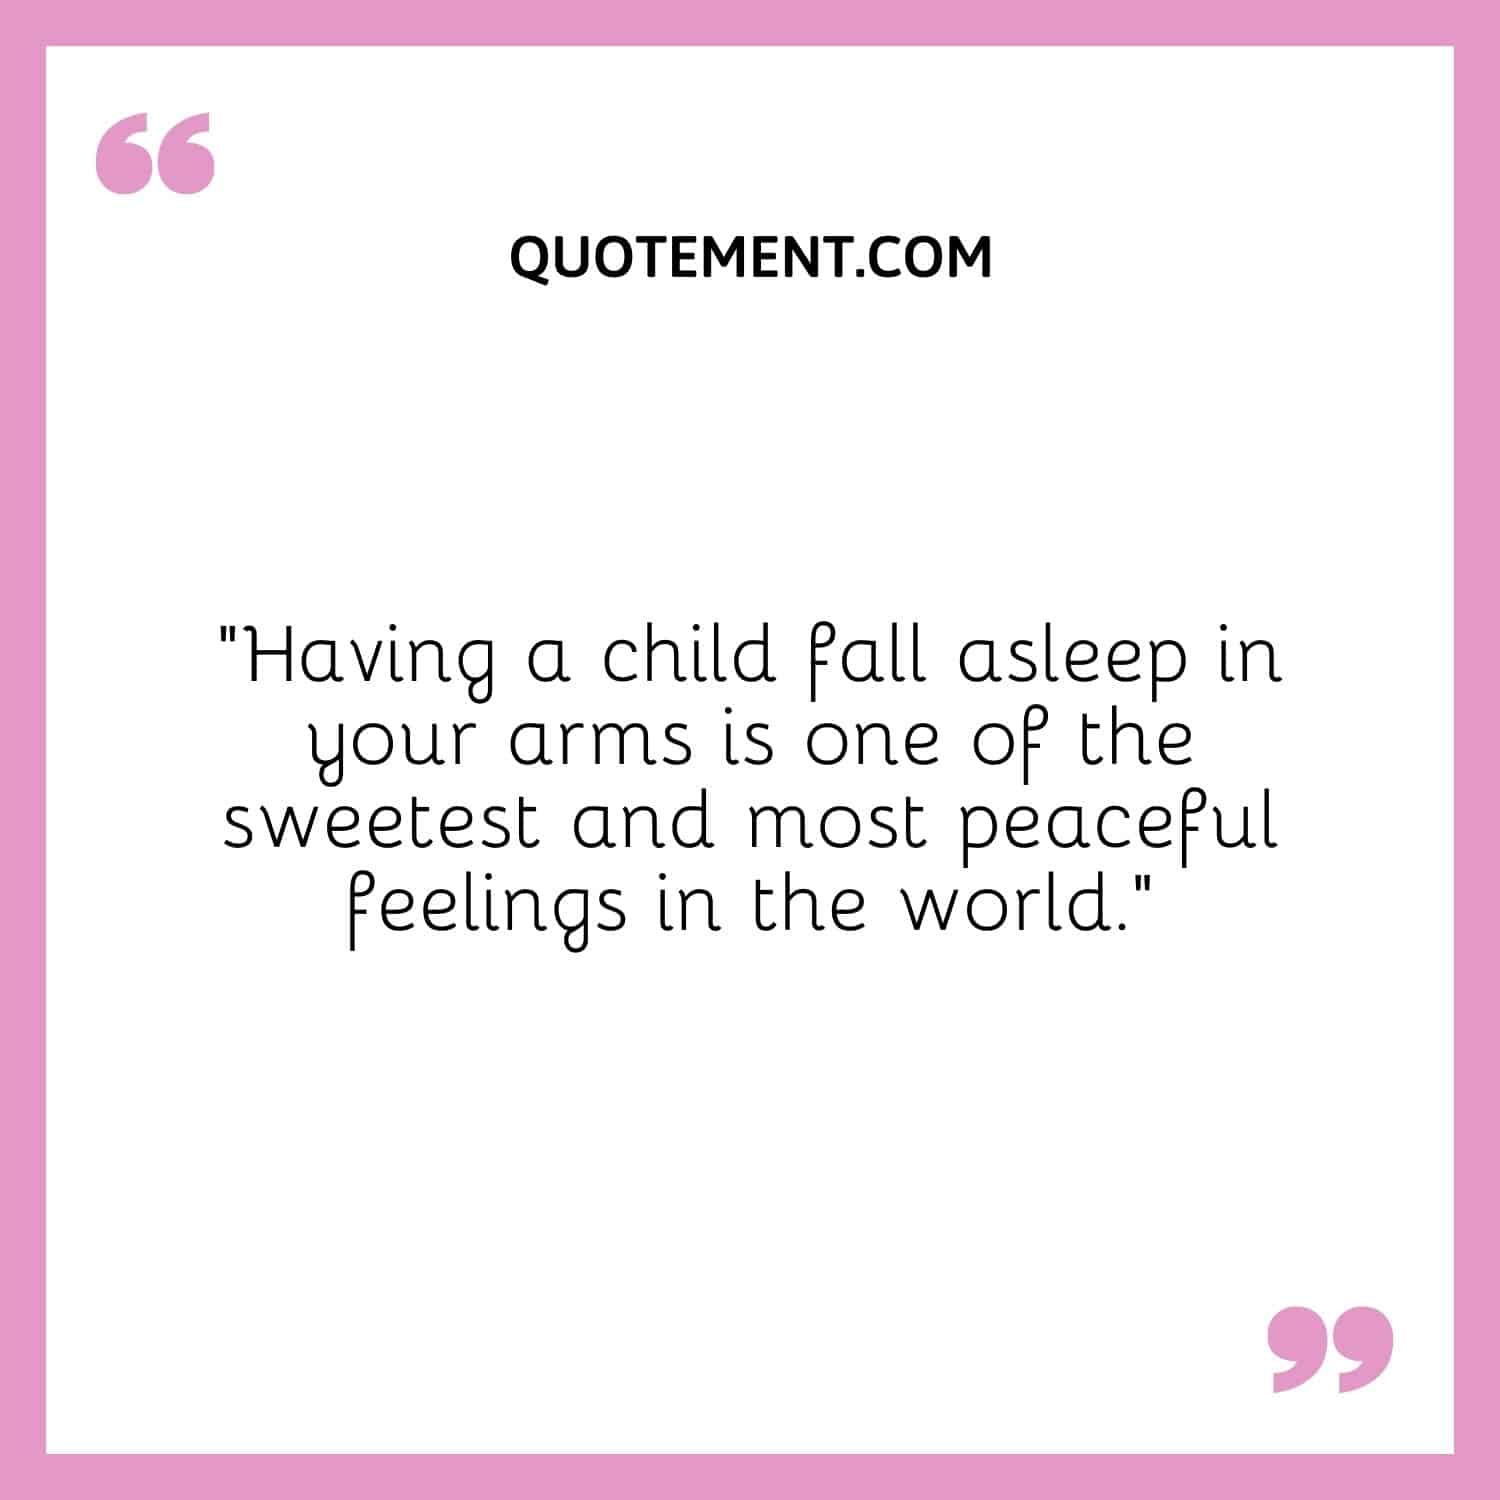 Having a child fall asleep in your arms is one of the sweetest and most peaceful feelings in the world